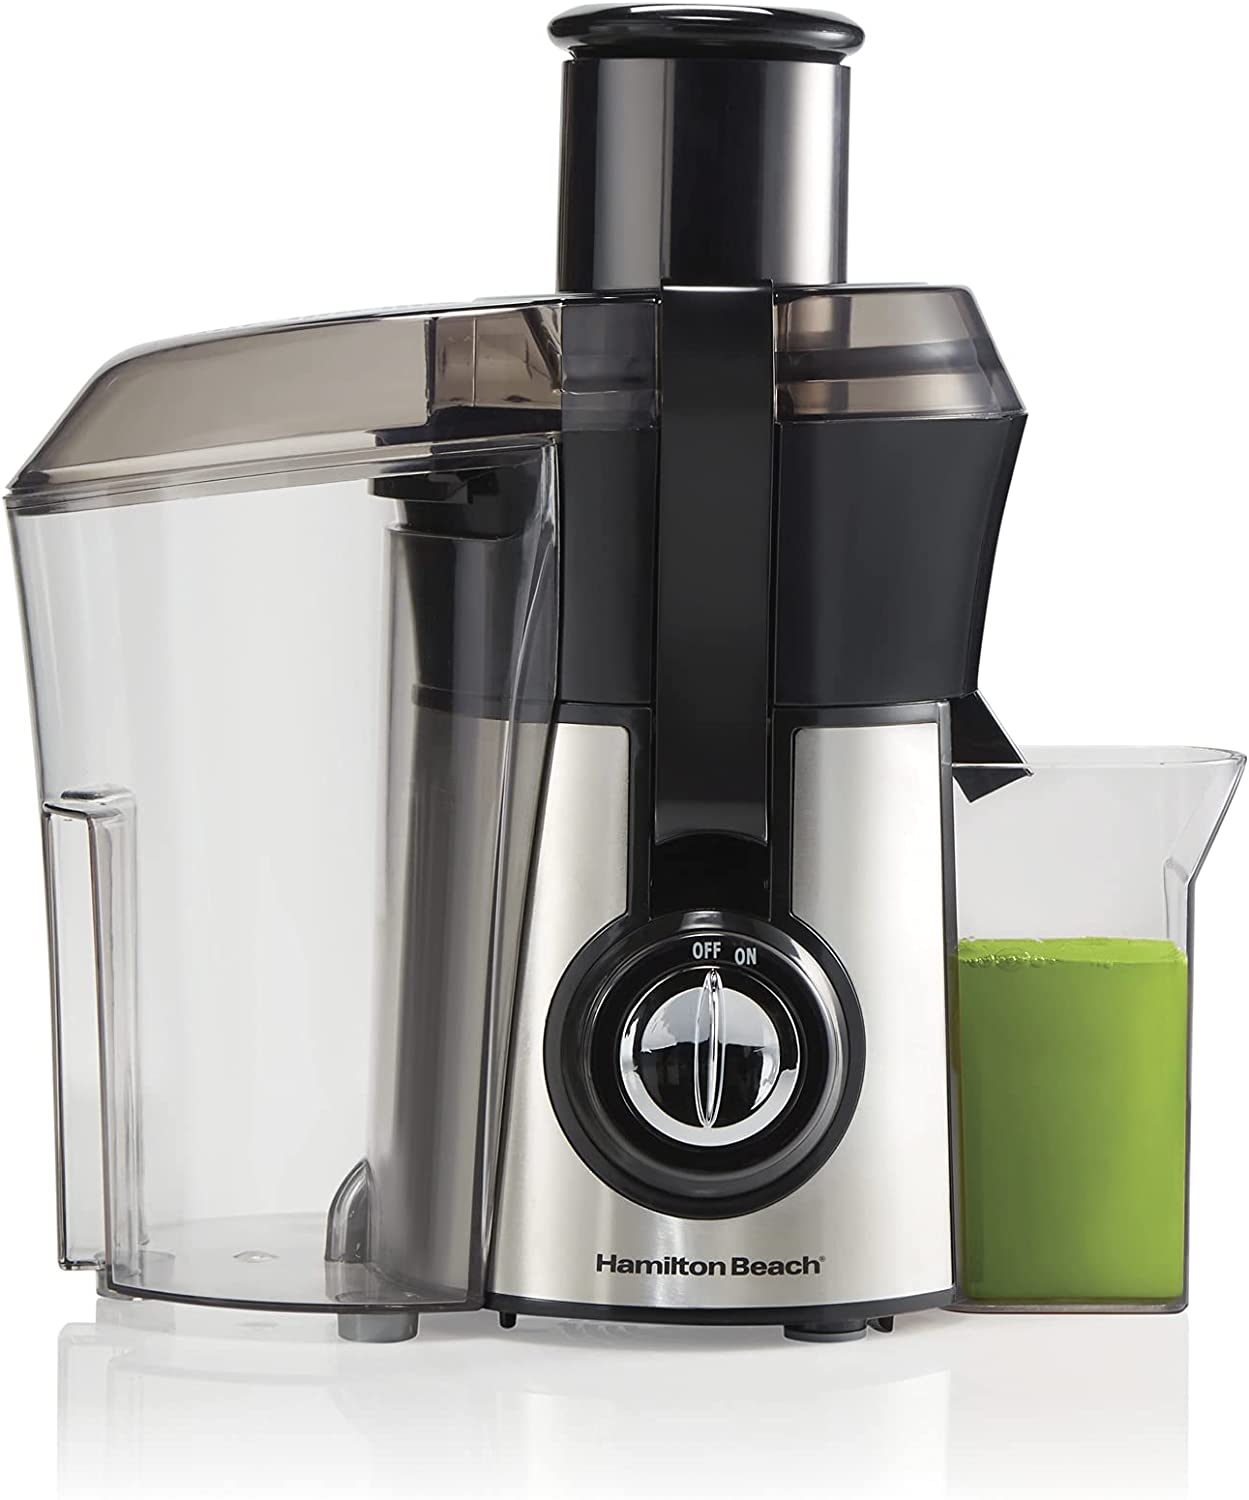 Hamilton Beach Juicer Machine, Big Mouth Large 3” Feed Chute for Whole Fruits and Vegetables, Easy to Clean, Centrifugal